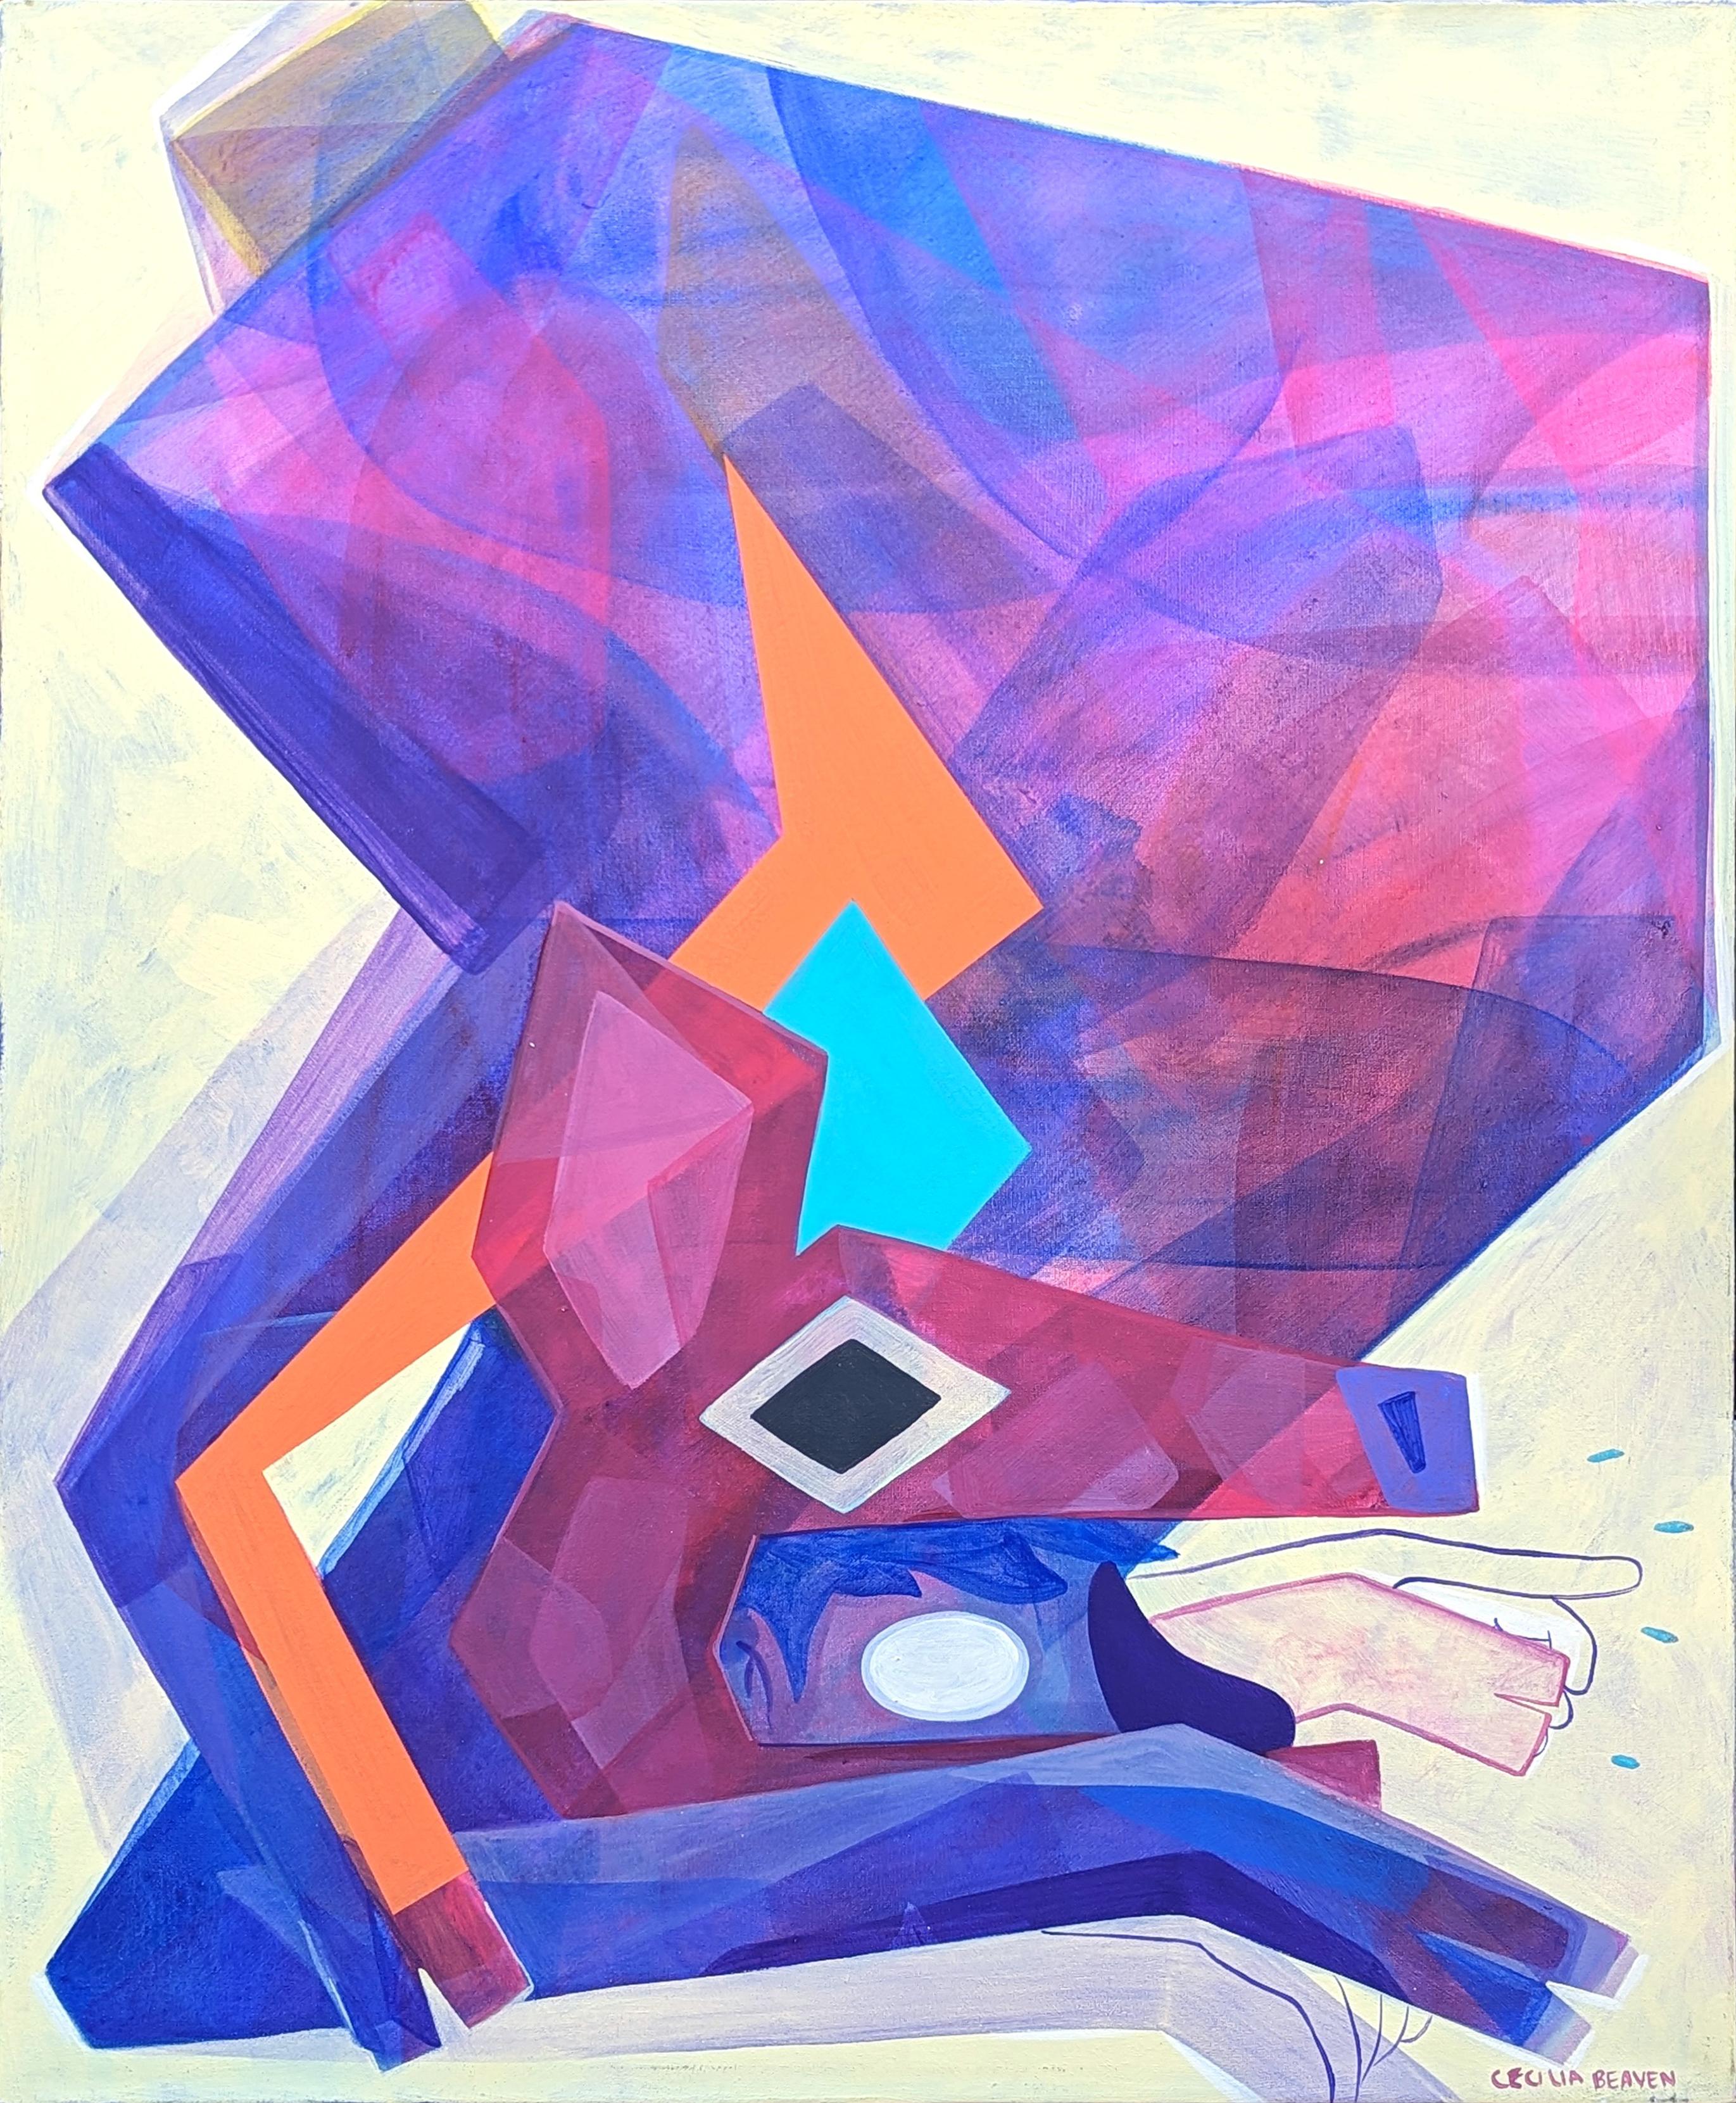 Cecilia Beaven Figurative Painting - Contemporary Abstract Orange, Purple, and Blue Biomorphic Animal Figure Painting